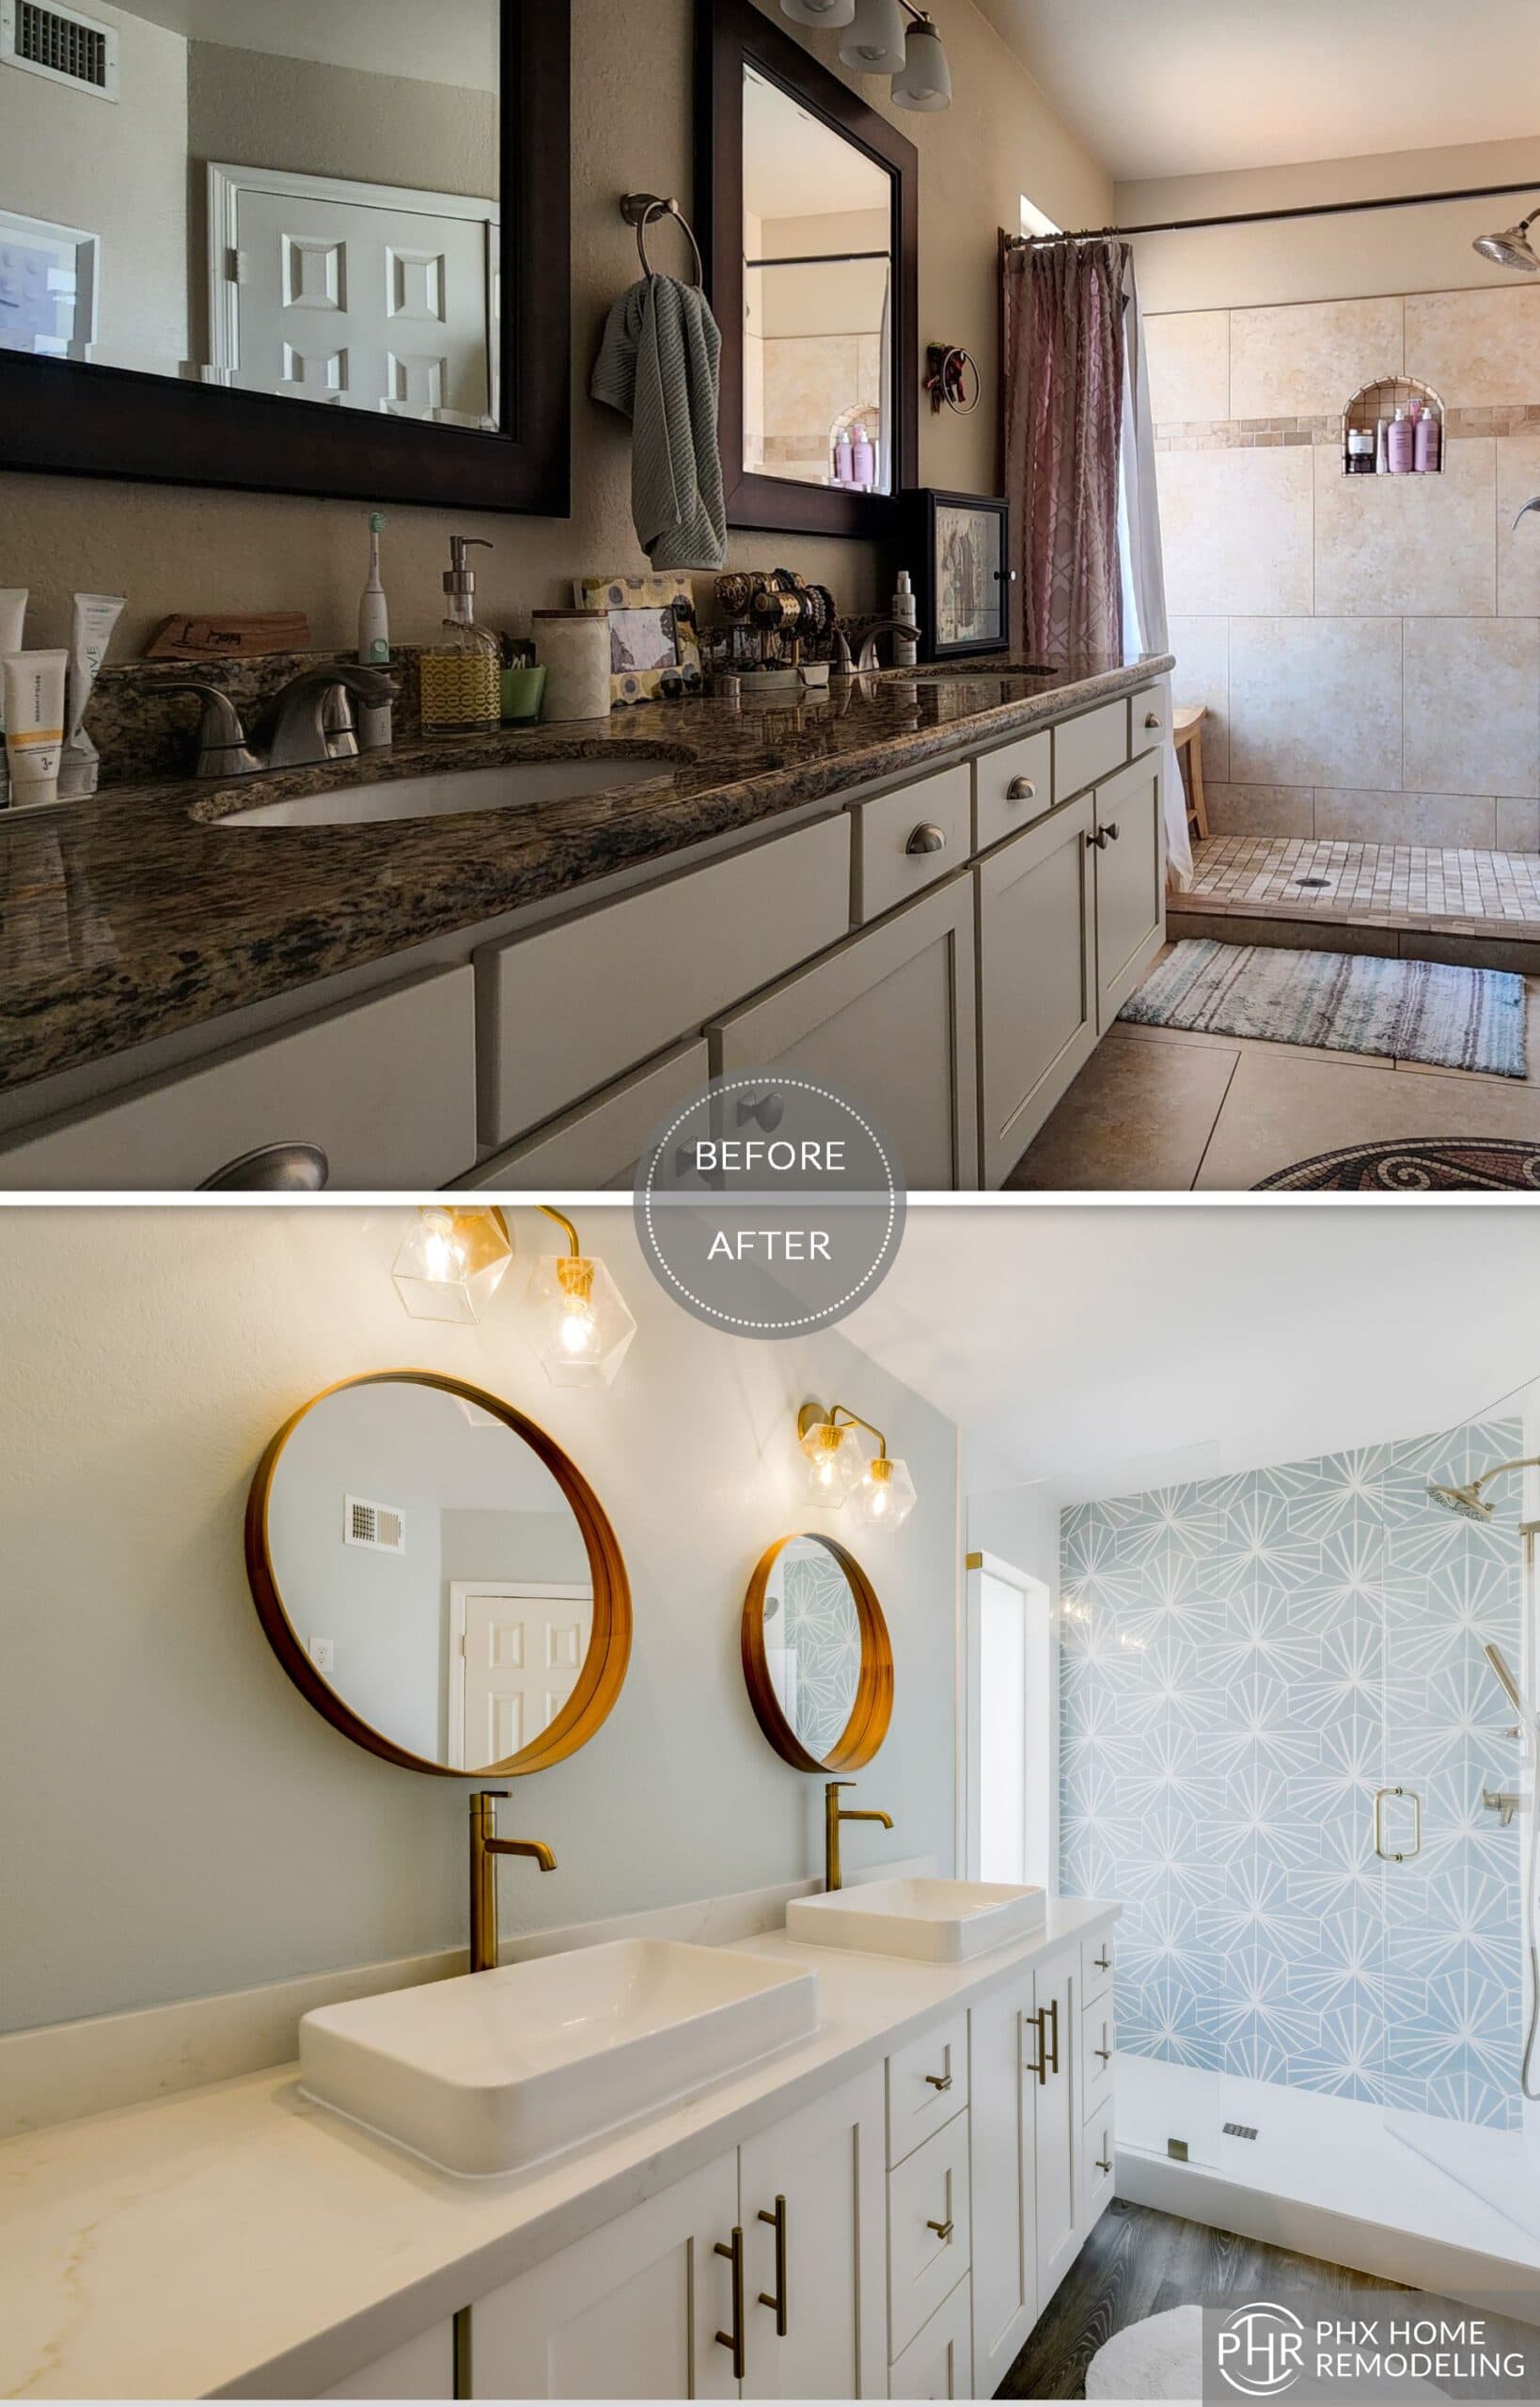 Before And After Pictures Of Kitchen, Bath, Living Room Remodeling - General Contractor Services In Gilbert Arizona